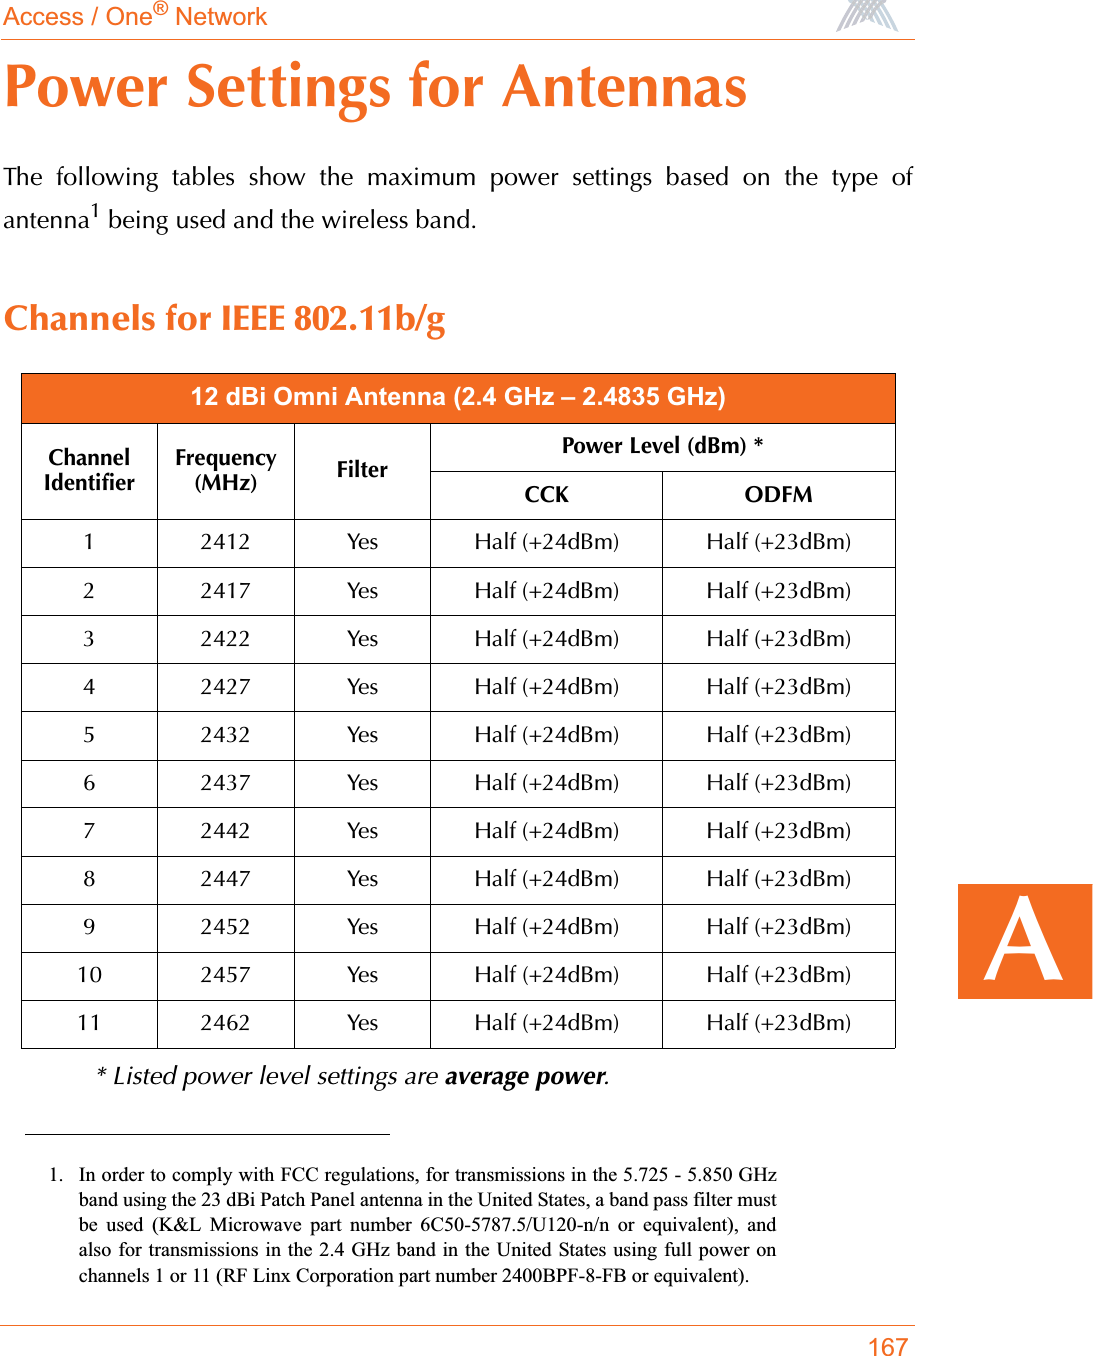 Access / One® Network167APower Settings for AntennasThe following tables show the maximum power settings based on the type ofantenna1 being used and the wireless band.Channels for IEEE 802.11b/g* Listed power level settings are average power.1. In order to comply with FCC regulations, for transmissions in the 5.725 - 5.850 GHzband using the 23 dBi Patch Panel antenna in the United States, a band pass filter mustbe used (K&amp;L Microwave part number 6C50-5787.5/U120-n/n or equivalent), andalso for transmissions in the 2.4 GHz band in the United States using full power onchannels 1 or 11 (RF Linx Corporation part number 2400BPF-8-FB or equivalent).12 dBi Omni Antenna (2.4 GHz – 2.4835 GHz)ChannelIdentifierFrequency (MHz) FilterPower Level (dBm) *CCK ODFM1 2412 Yes Half (+24dBm) Half (+23dBm)2 2417 Yes Half (+24dBm) Half (+23dBm)3 2422 Yes Half (+24dBm) Half (+23dBm)4 2427 Yes Half (+24dBm) Half (+23dBm)5 2432 Yes Half (+24dBm) Half (+23dBm)6 2437 Yes Half (+24dBm) Half (+23dBm)7 2442 Yes Half (+24dBm) Half (+23dBm)8 2447 Yes Half (+24dBm) Half (+23dBm)9 2452 Yes Half (+24dBm) Half (+23dBm)10 2457 Yes Half (+24dBm) Half (+23dBm)11 2462 Yes Half (+24dBm) Half (+23dBm)